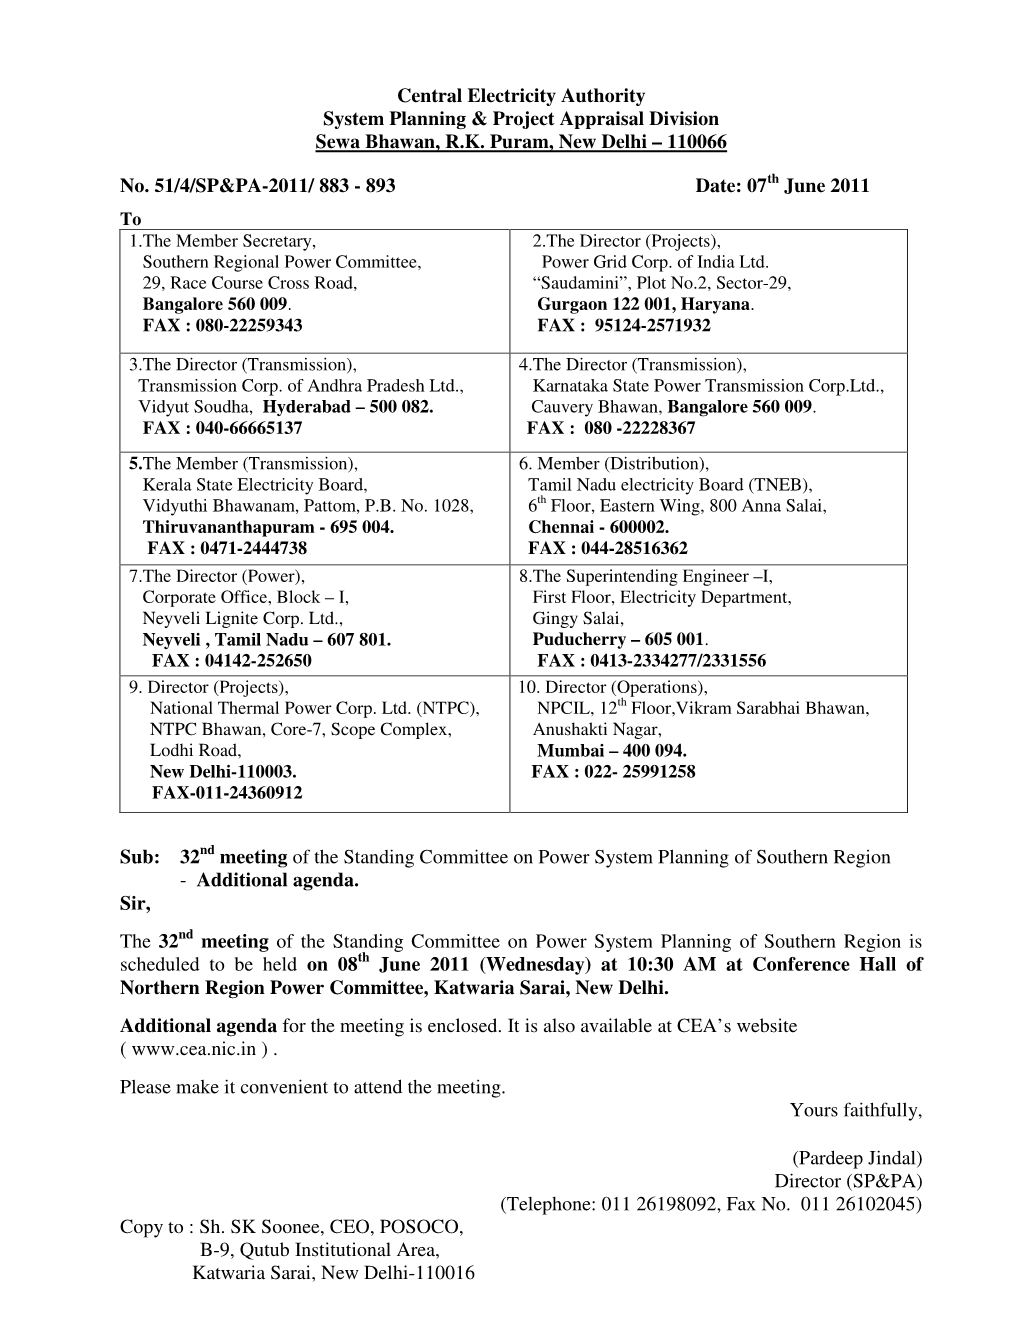 Additional Agenda Note for 32 Nd Meeting of Standing Committee on Power System Planning in Southern Region (SCPSPSR)